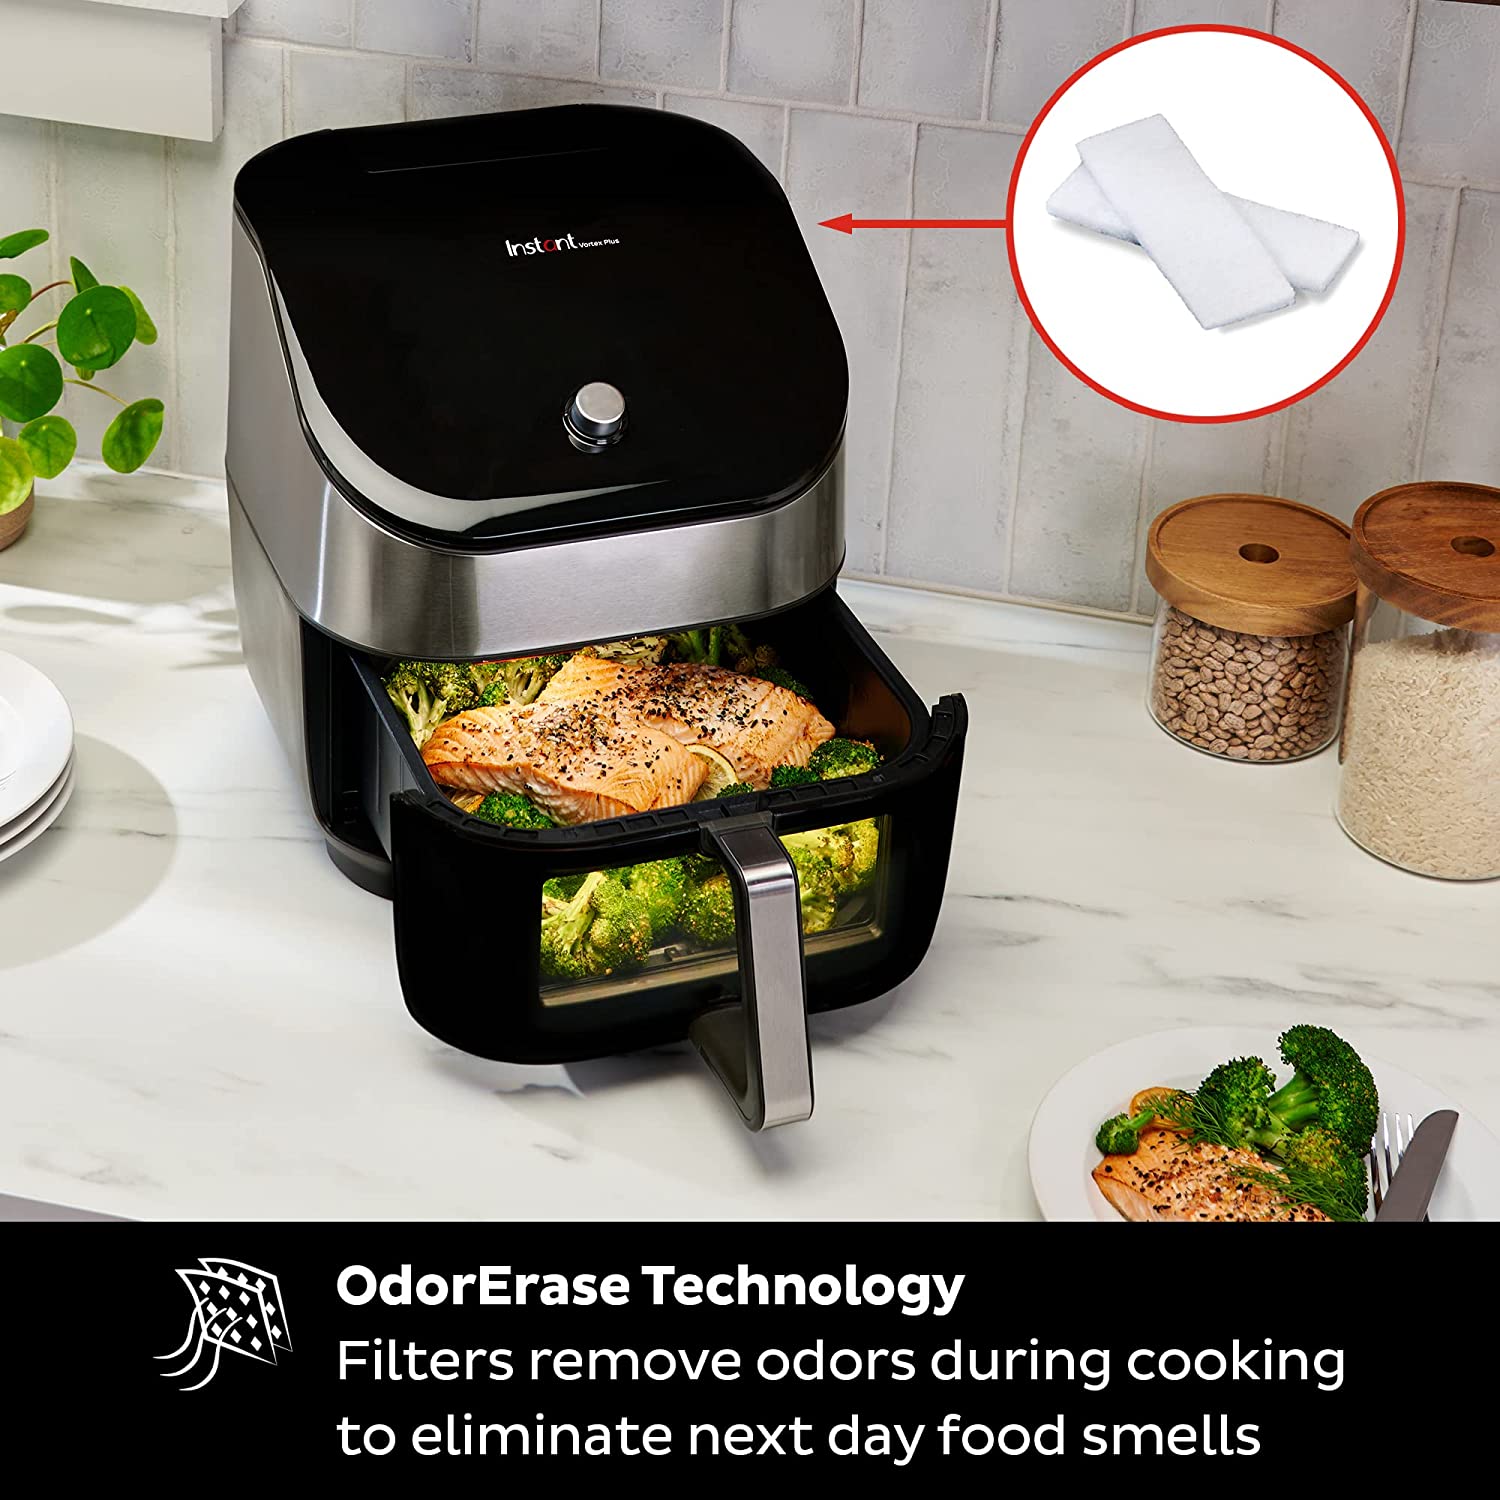 https://discounttoday.net/wp-content/uploads/2023/01/Instant-Vortex-Plus-6-Quart-Air-Fryer-Oven-From-the-Makers-of-Instant-Pot-with-Odor-Erase-Technology-ClearCook-Cooking-Window-App-with-over-100-Recipes-Single-Basket-Stainless-Steel4.jpg